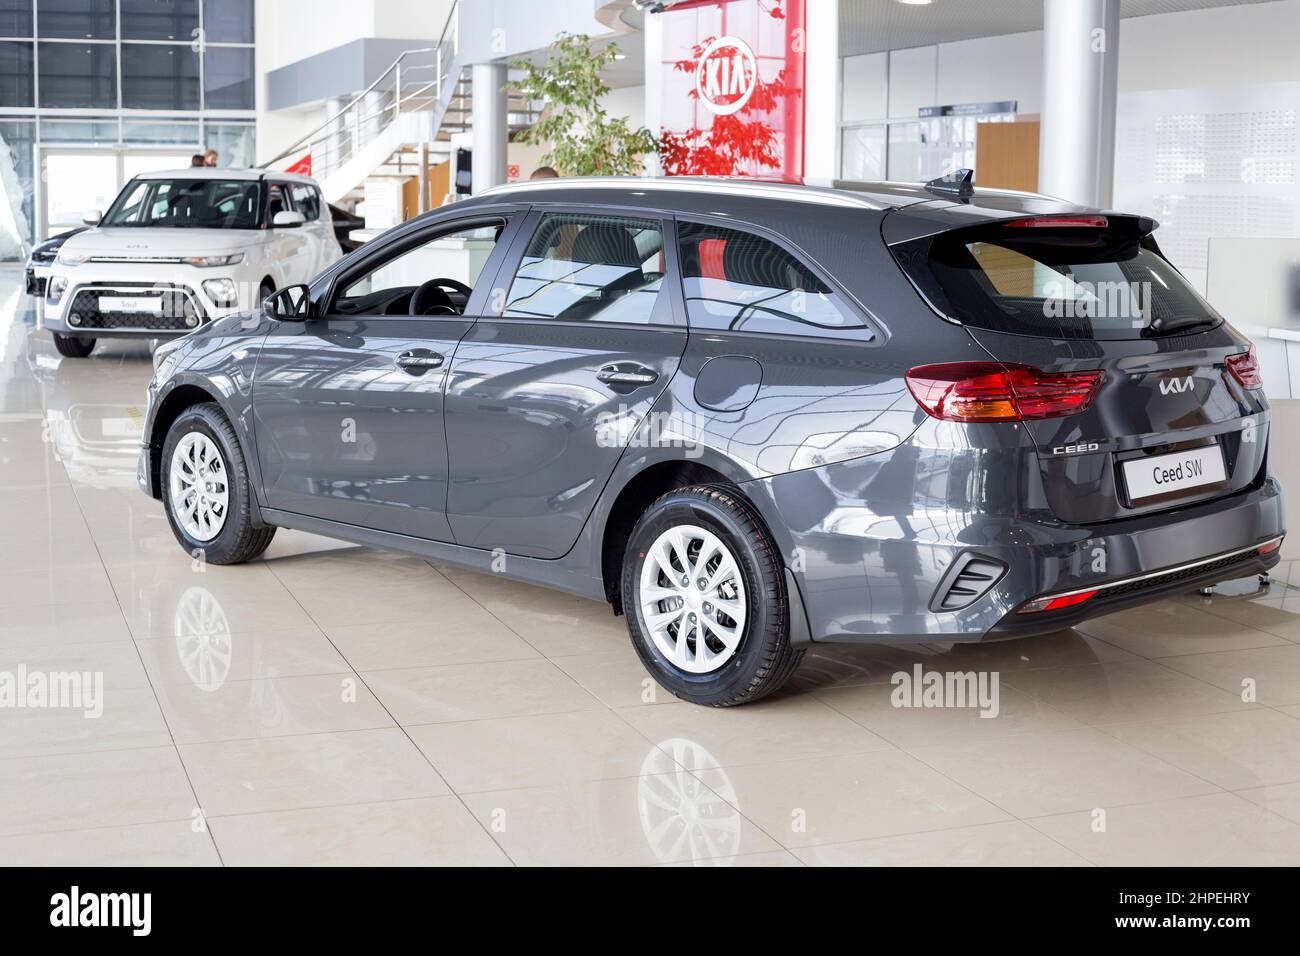 Russia, Izhevsk - February 17, 2022: KIA showroom. New modern Ceed SW estate car in dealer showroom. Back and side view. Famous world brand. Stock Photo